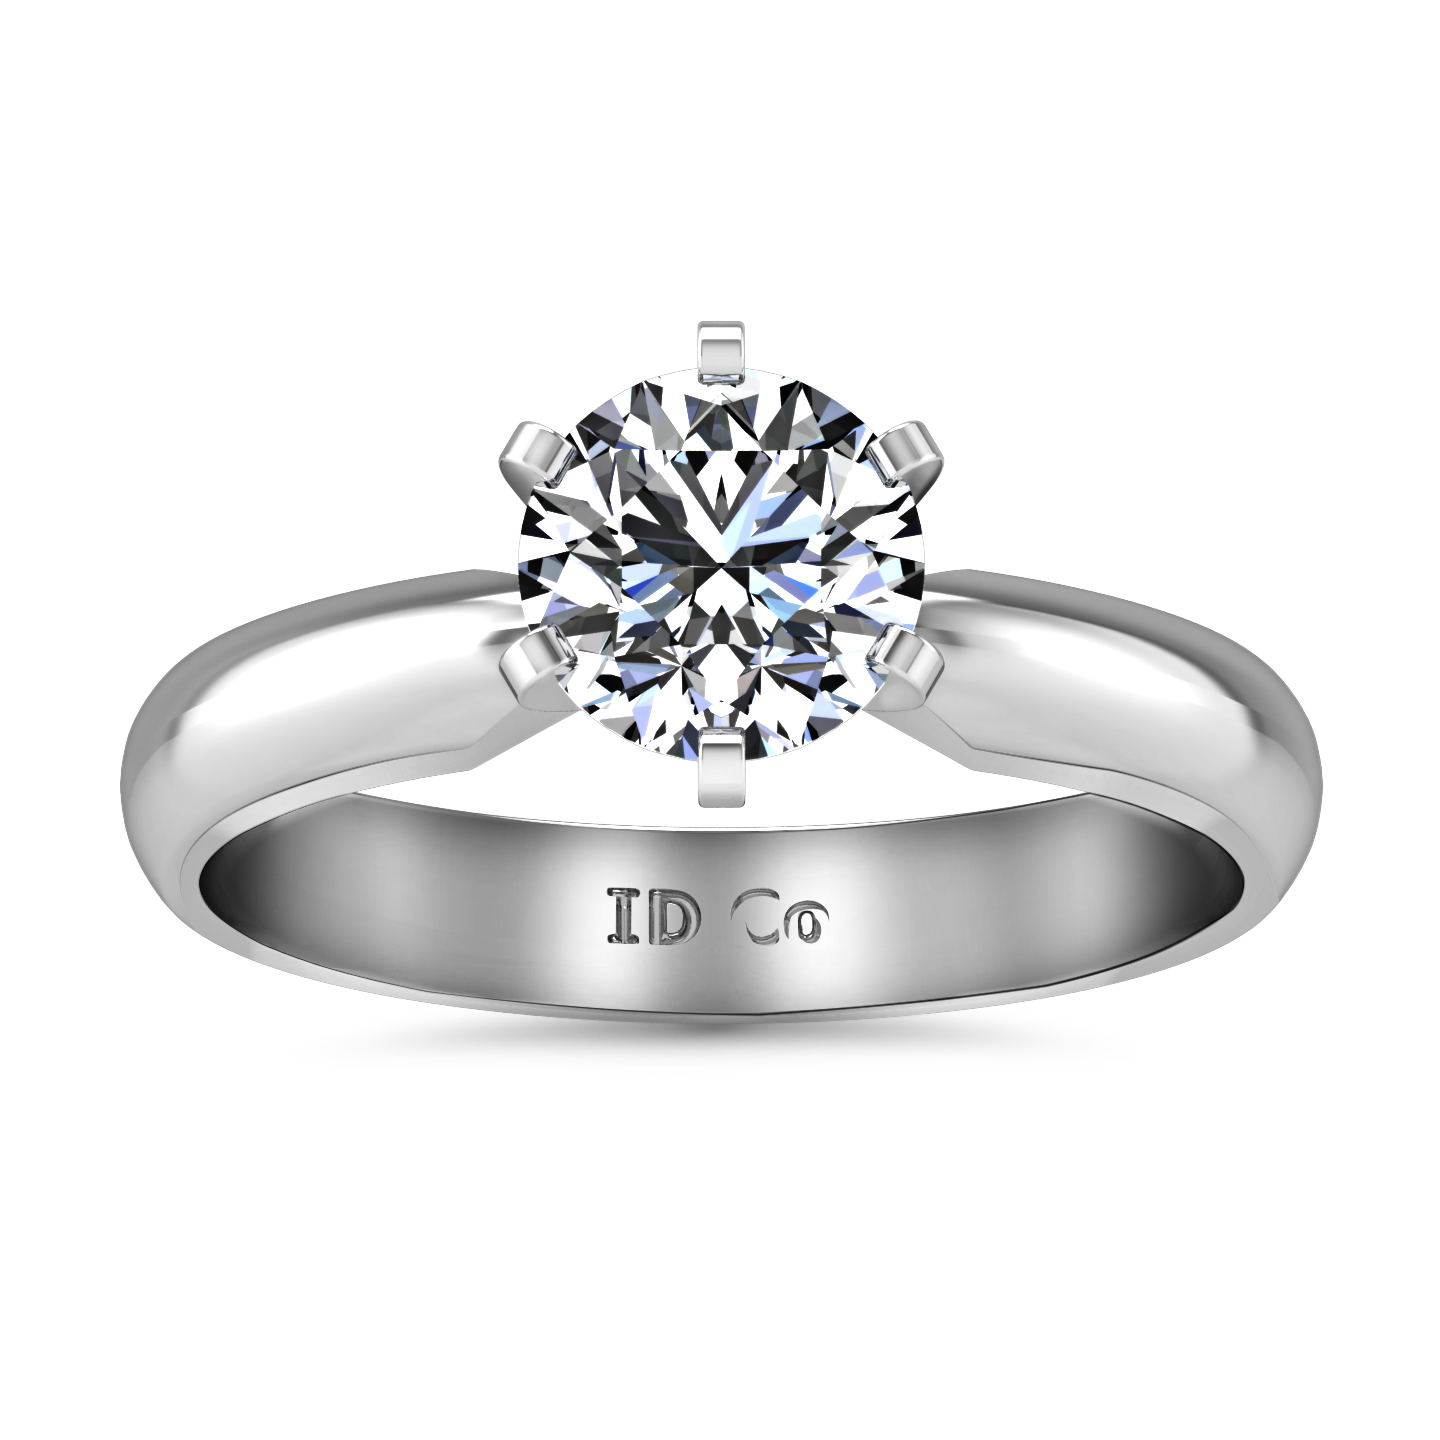 Solitaire Engagement Ring Wide Classic 6 Prong